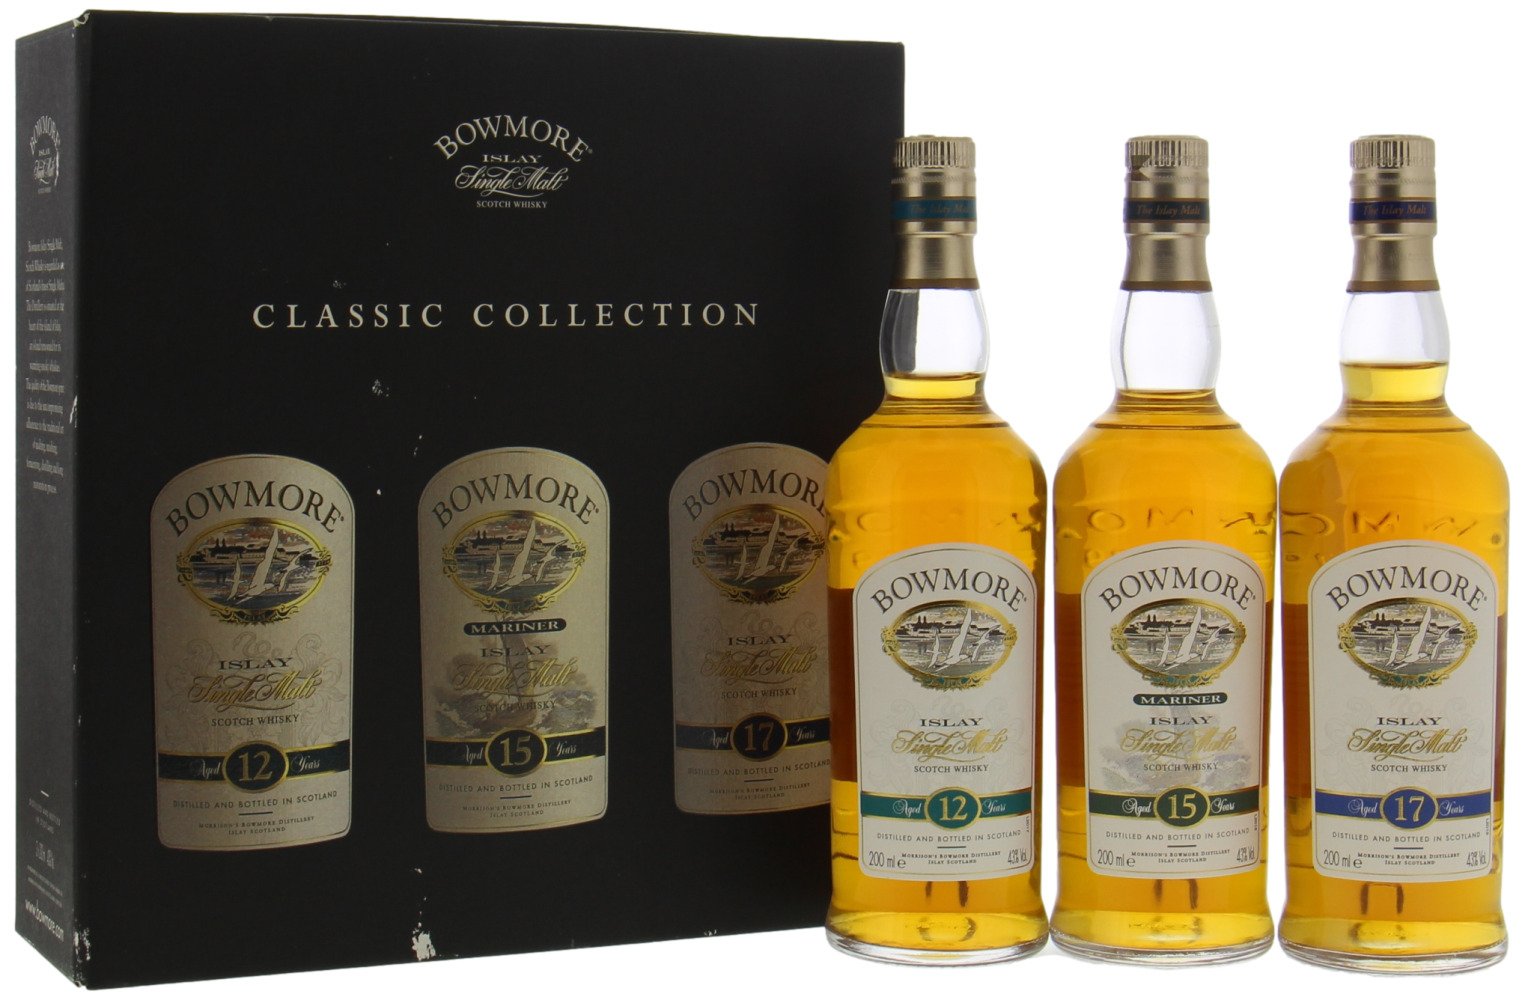 Bowmore - Set Containing Legend,12, 15, 17 NV In Original Container 10093